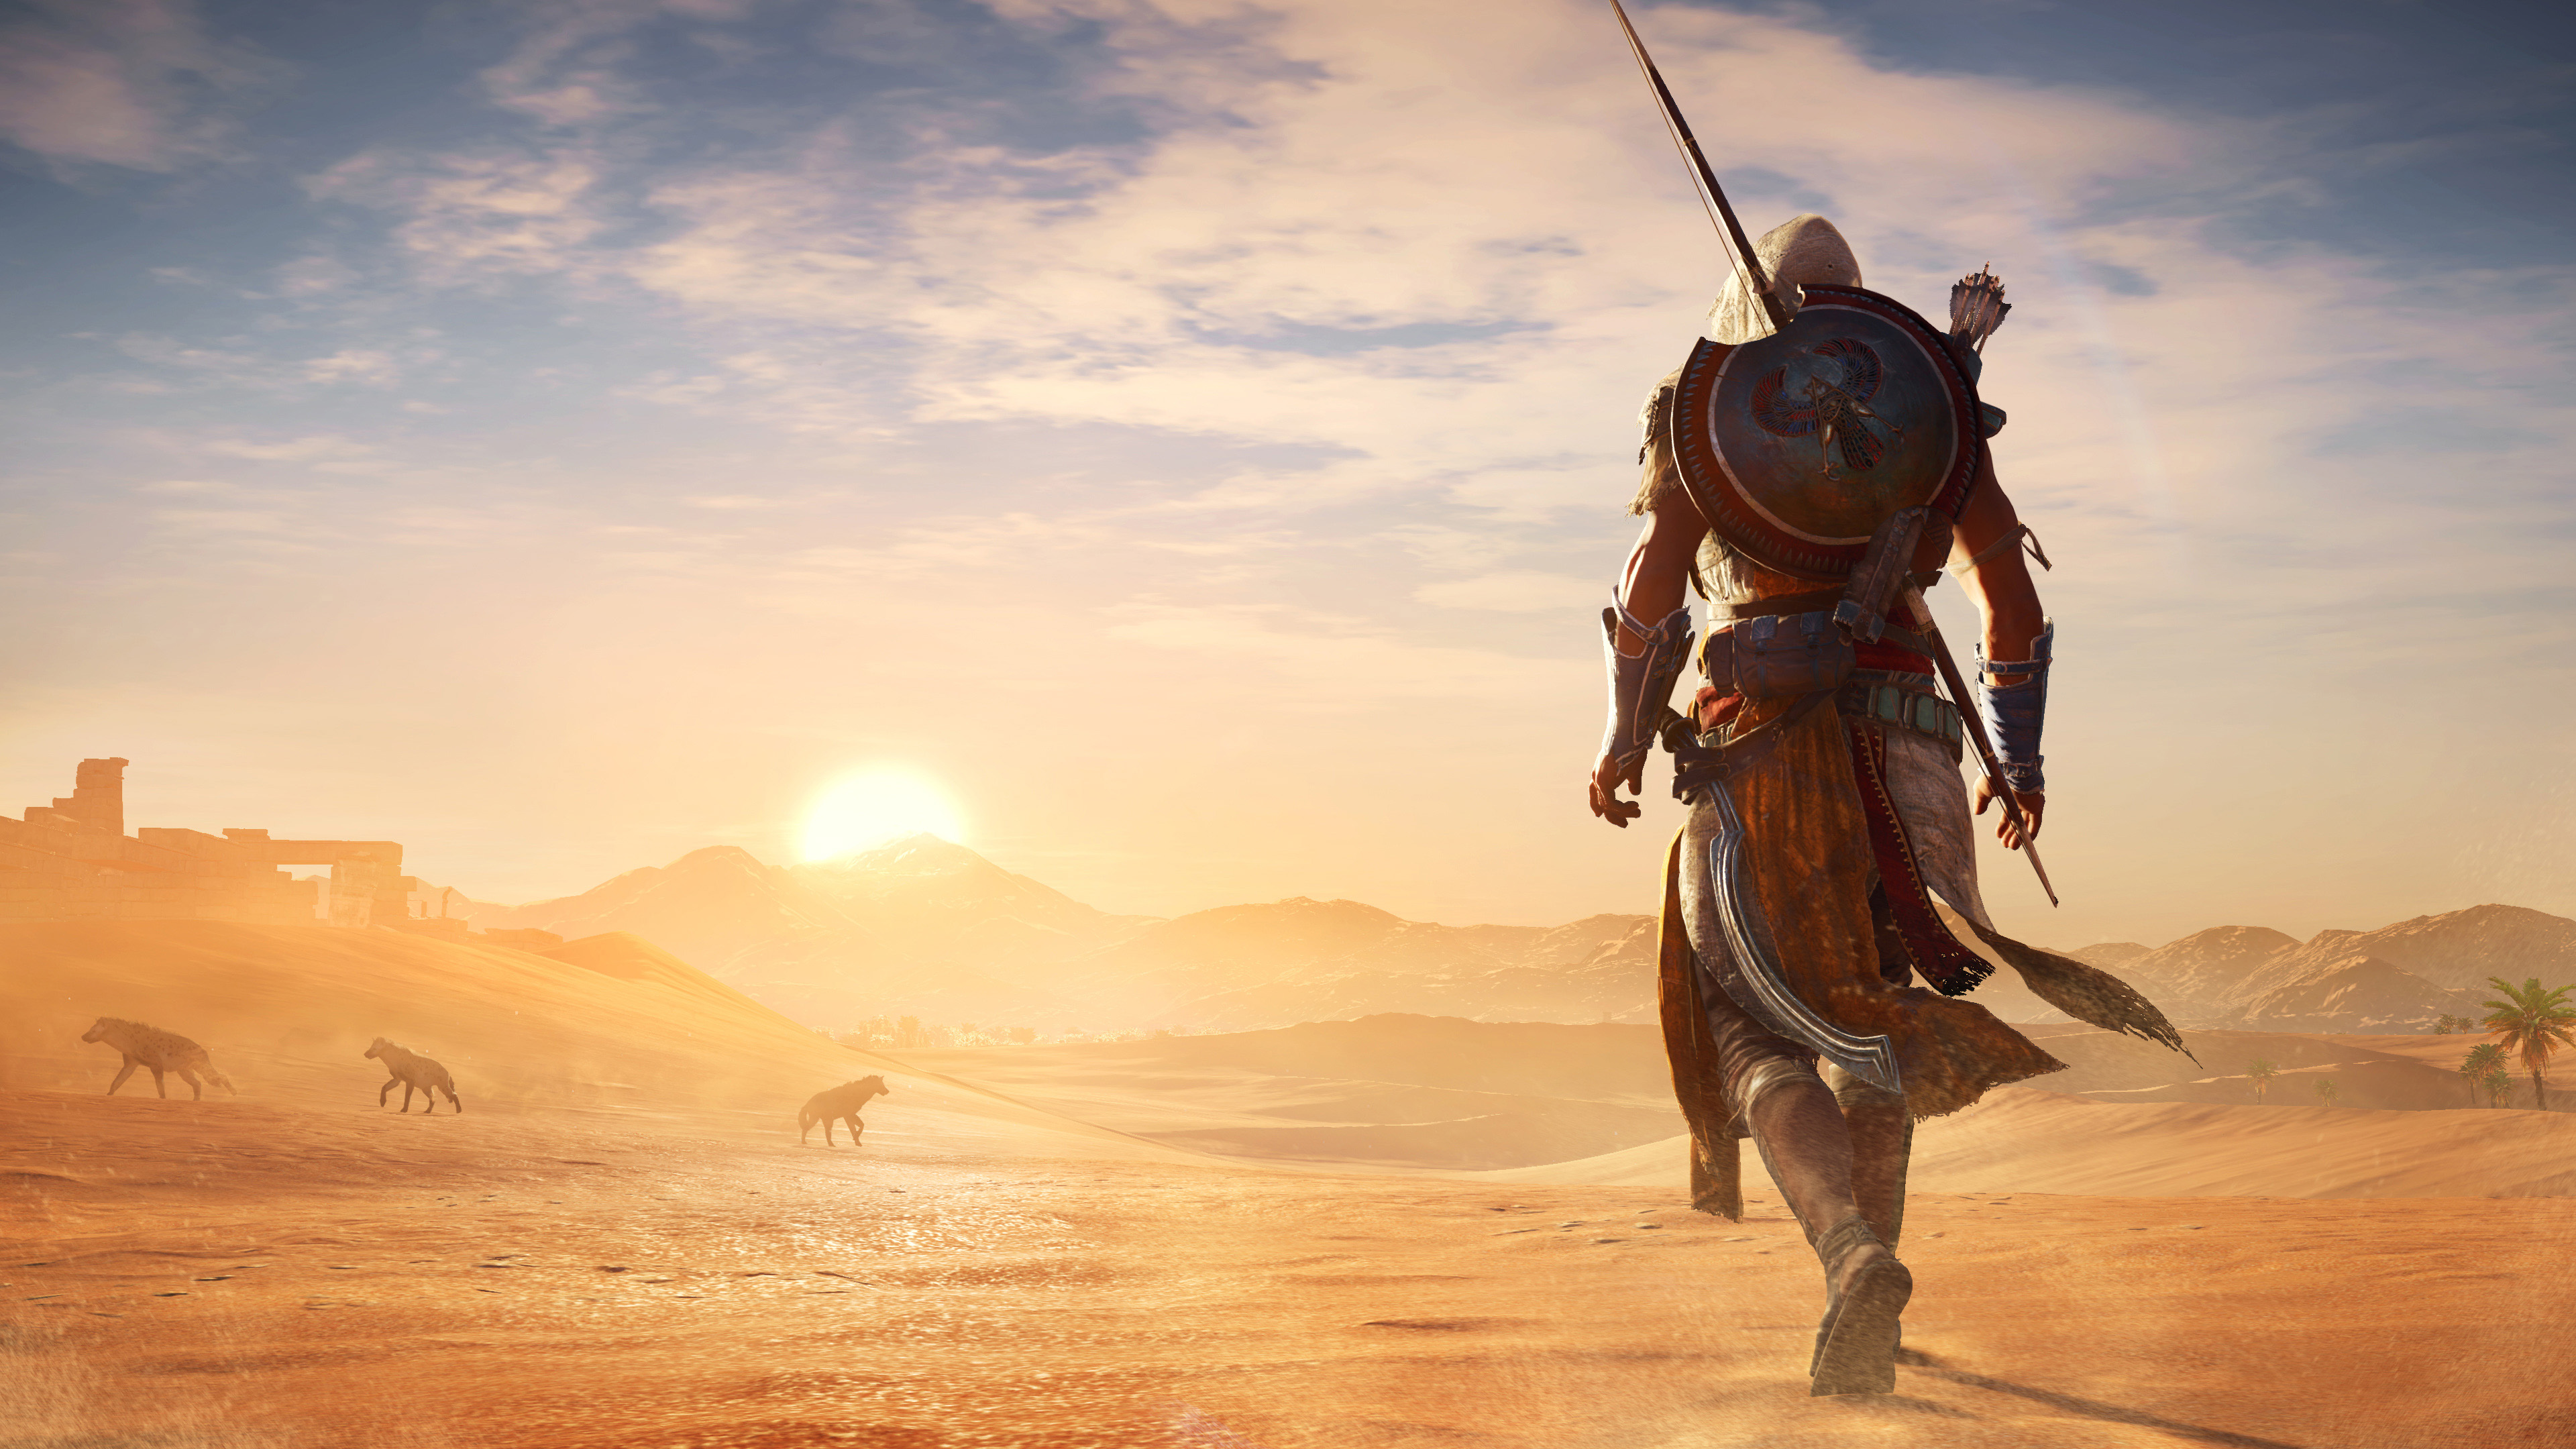 Media asset in full size related to 3dfxzone.it news item entitled as follows: Ubisoft pubblica lo story trailer e screenshot in 4K di Assassin's Creed Origins | Image Name: news26902_Assassin-s-Creed-Origins-Screenshot_4.jpg